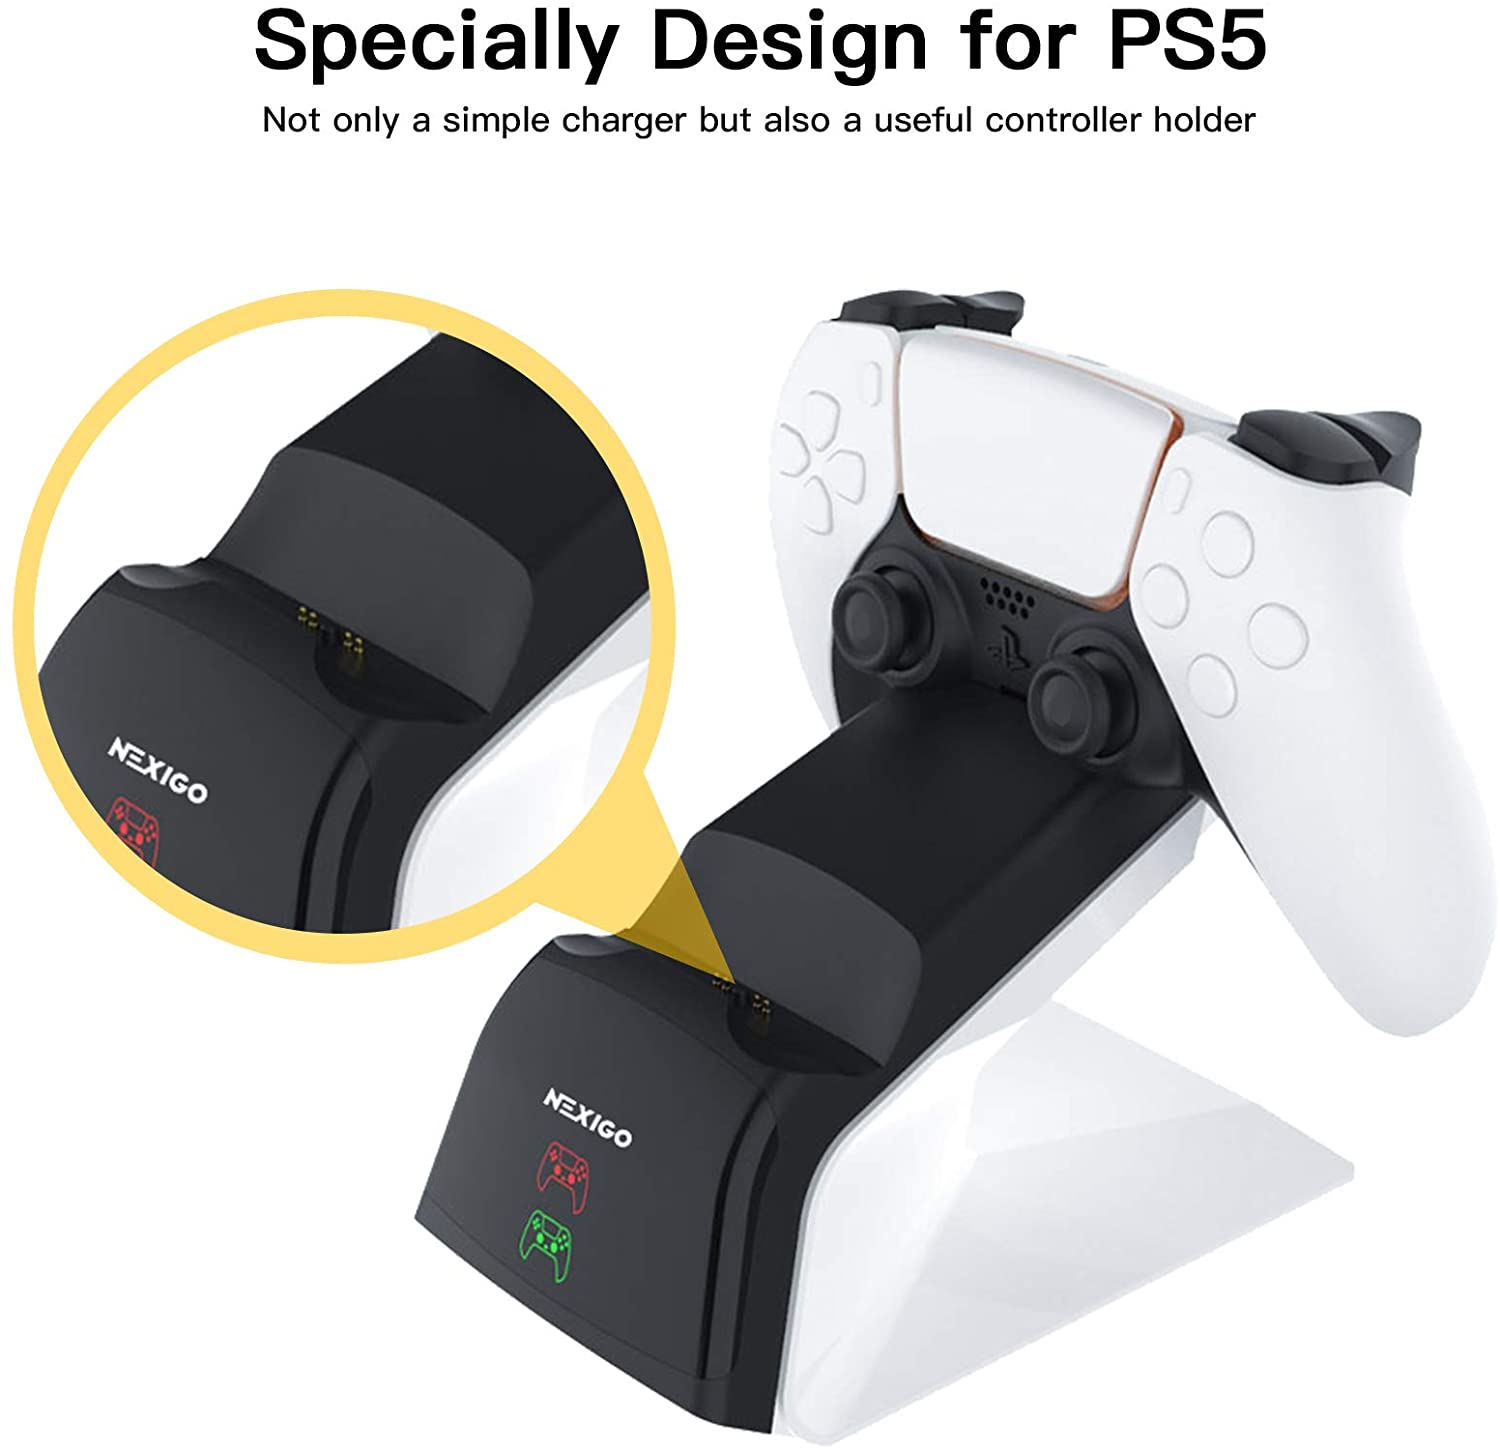 The charging station is specifically designed to hold and charge the PS5 controller